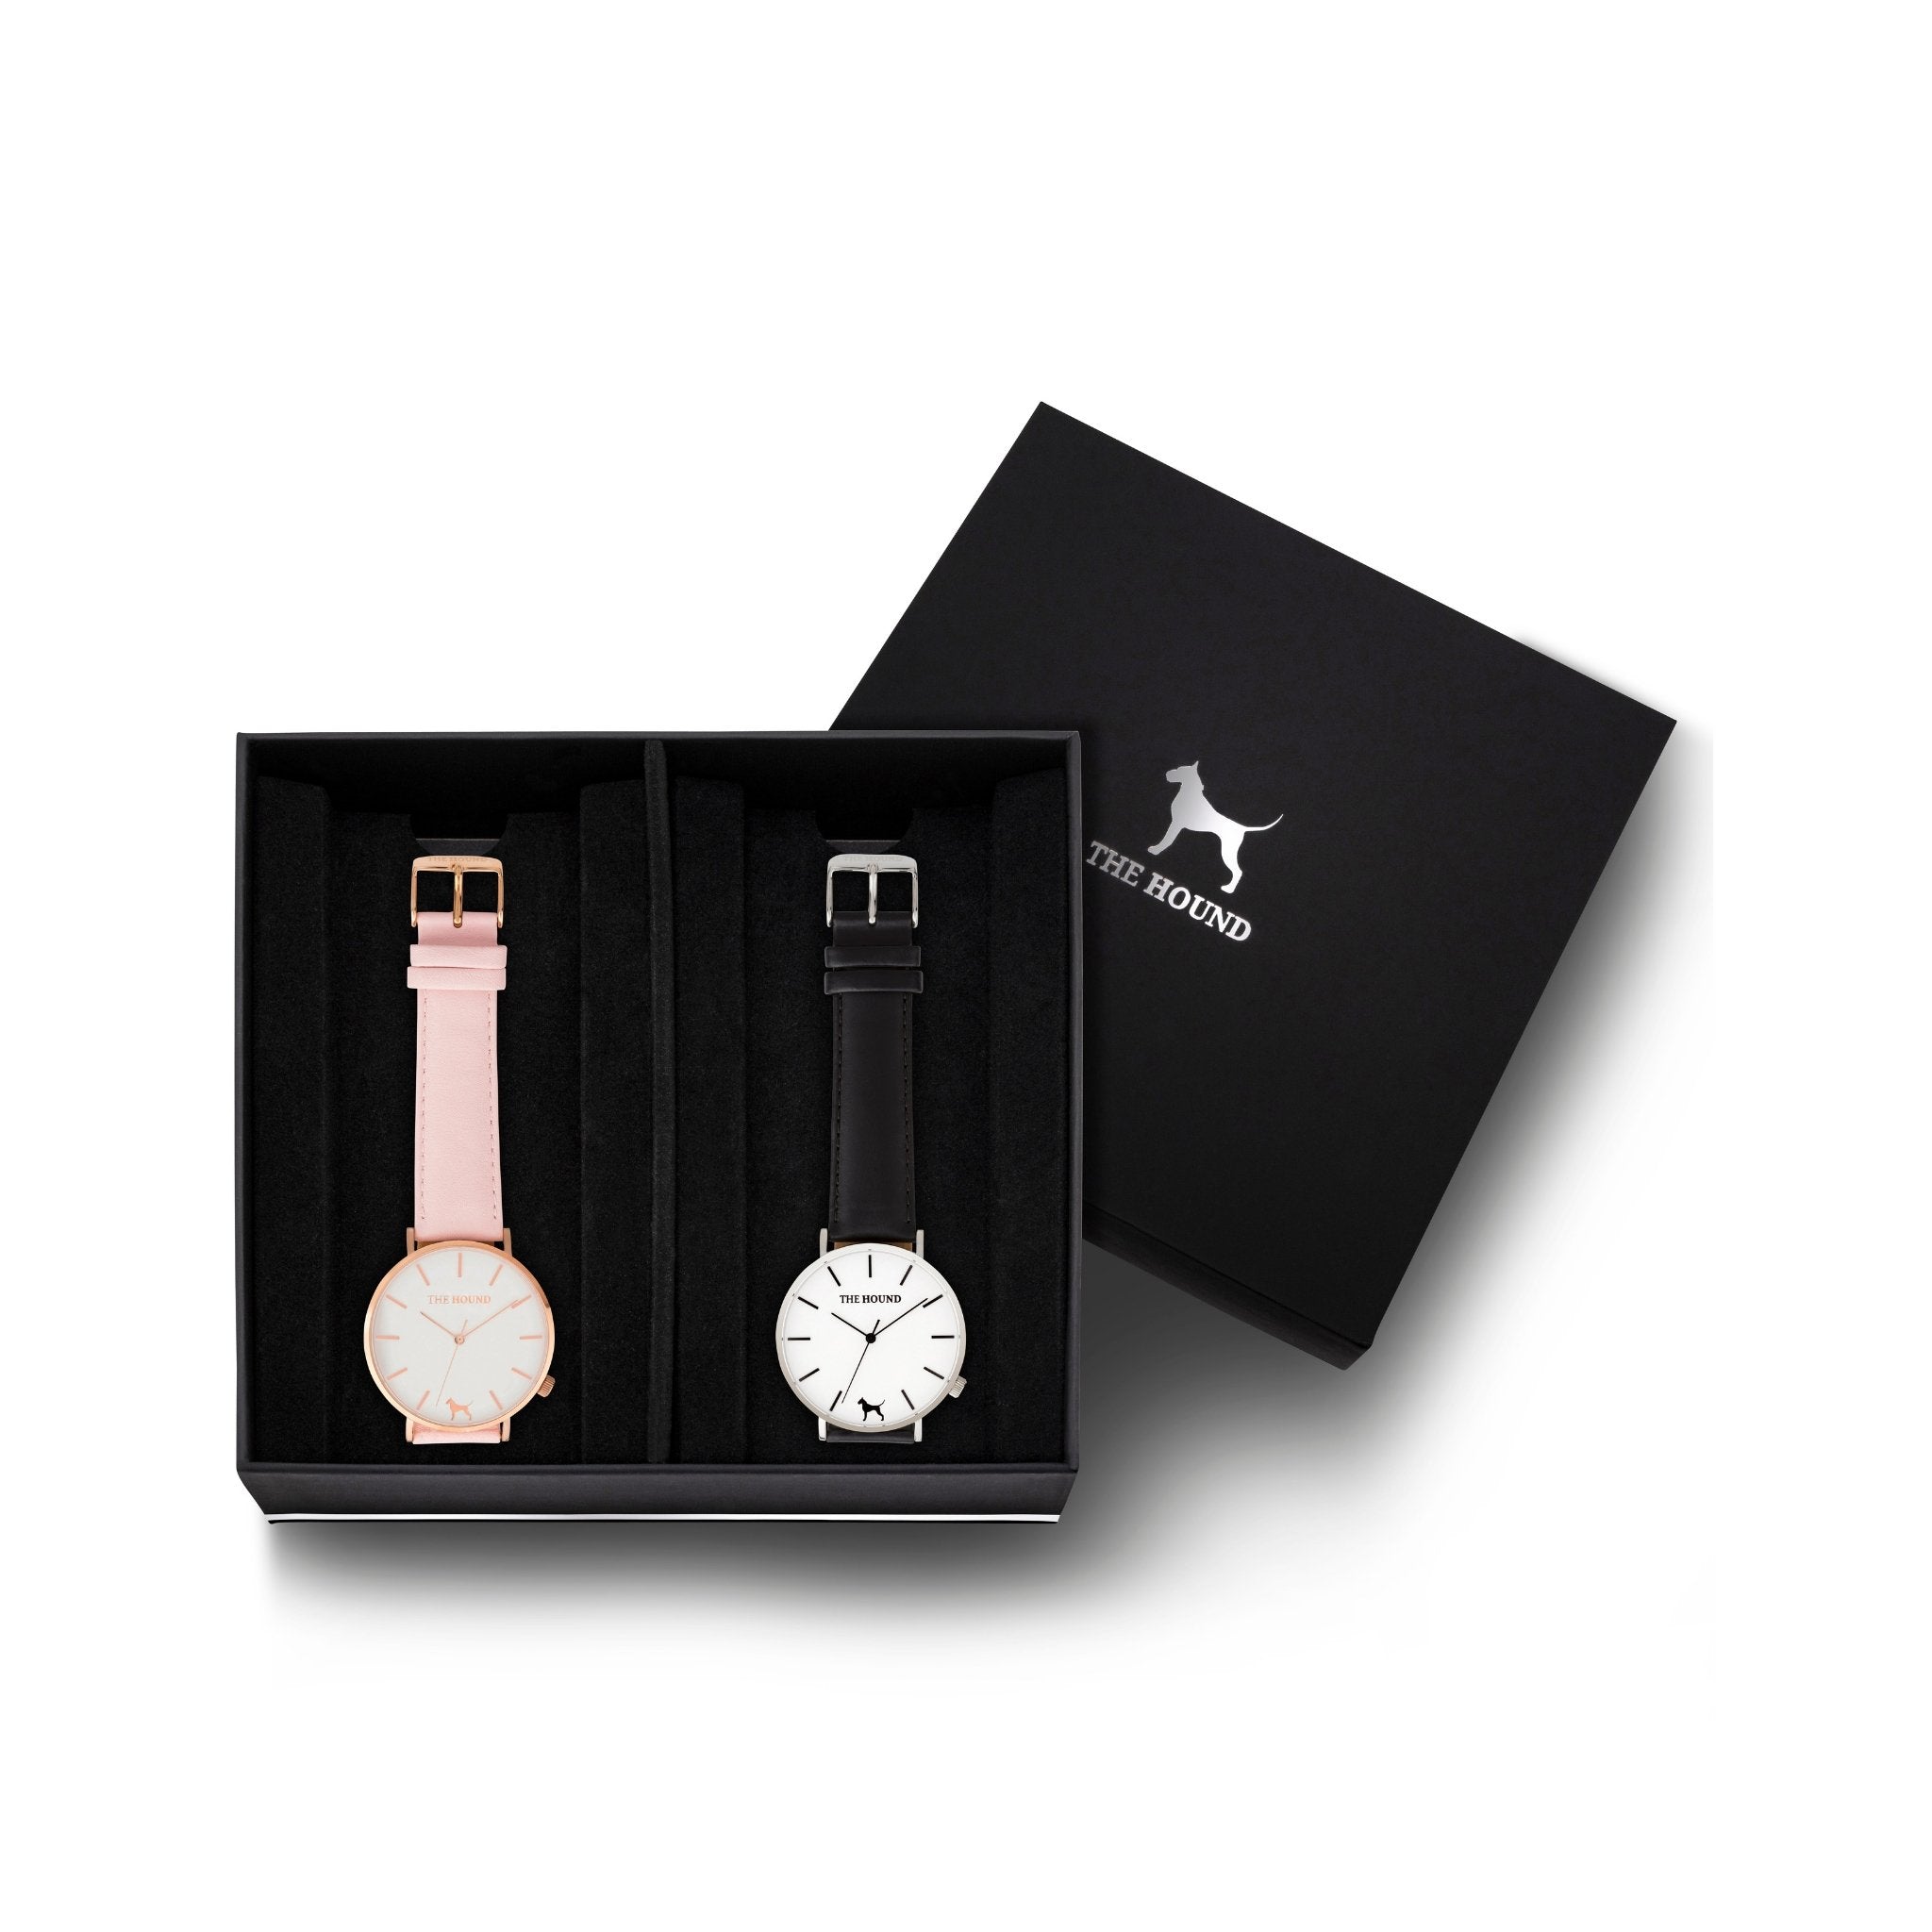 Custom gift set - Rose gold and white watch with stitched blush pink genuine leather band and a silver and white watch with stitched black genuine leather band